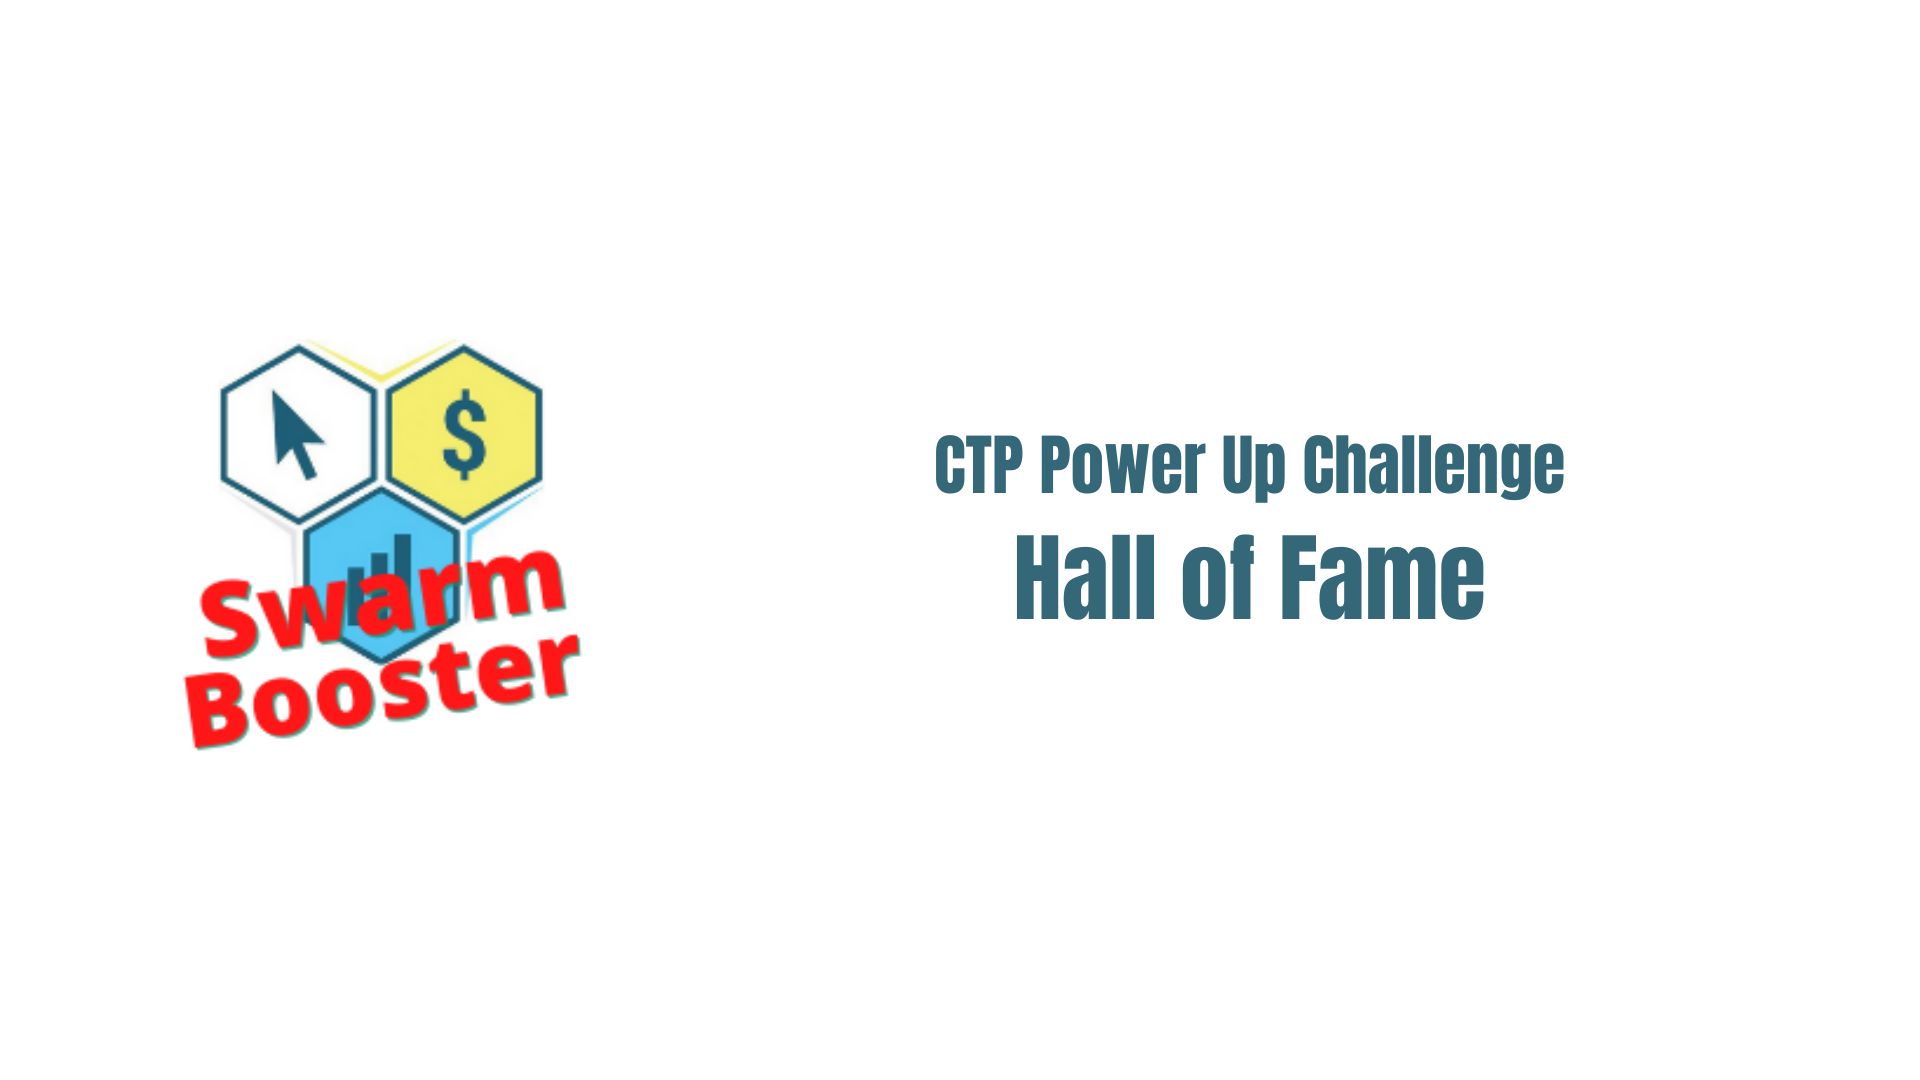 @ctpsb/ctp-power-up-challenge-hall-of-fame